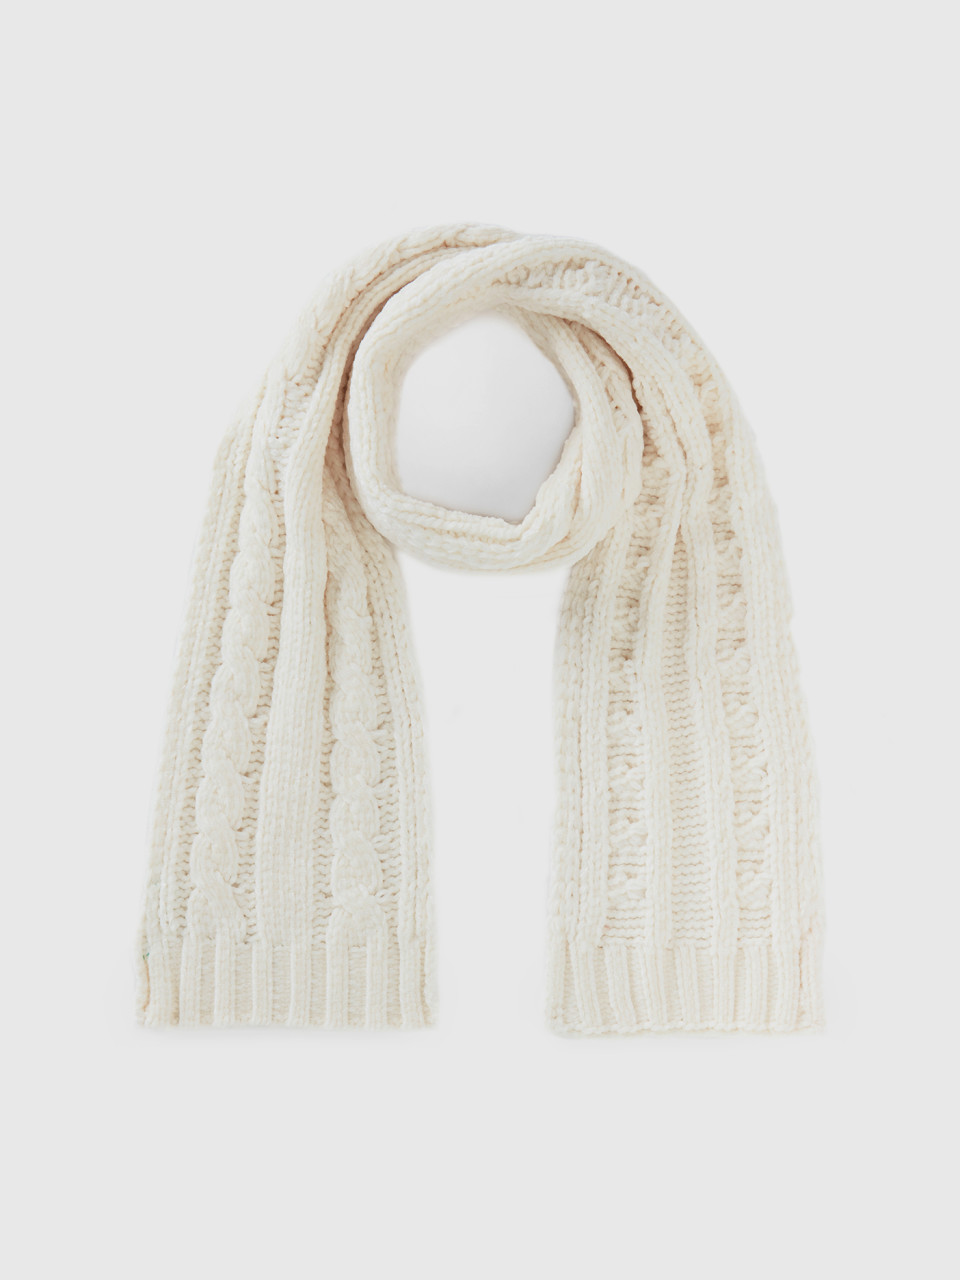 Benetton, Chenille Scarf With Cable Knit, White, Kids